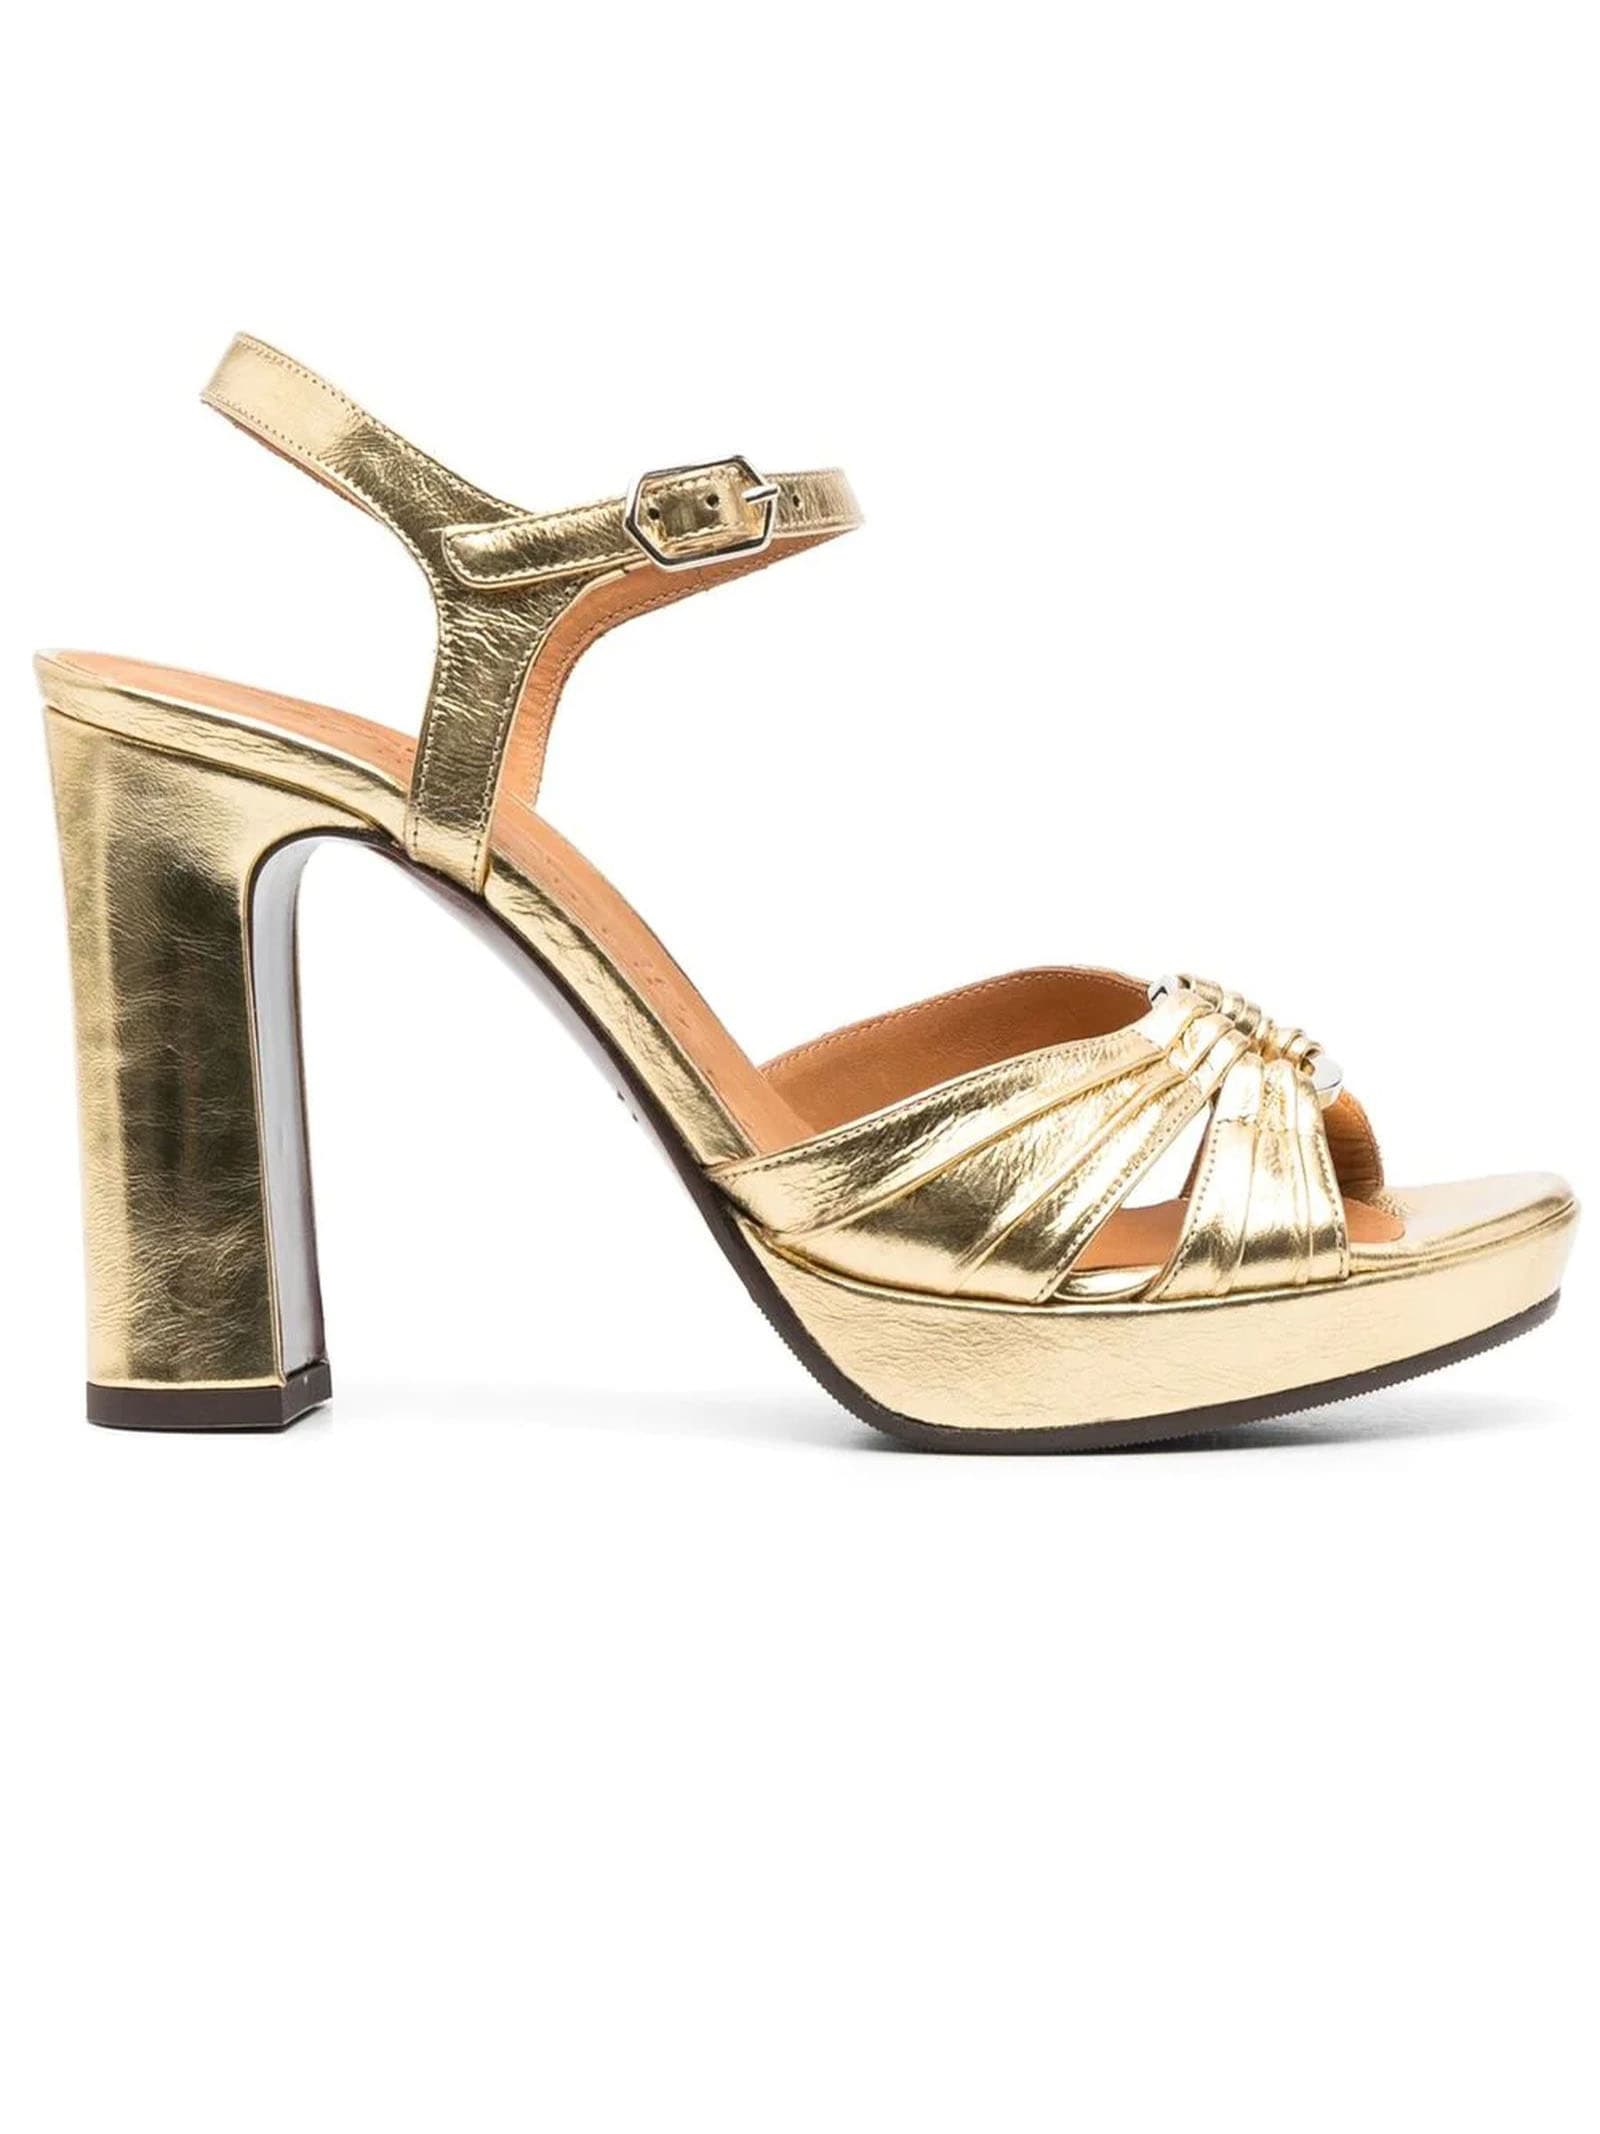 CHIE MIHARA GOLD-TONE LEATHER CHIVA SANDALS